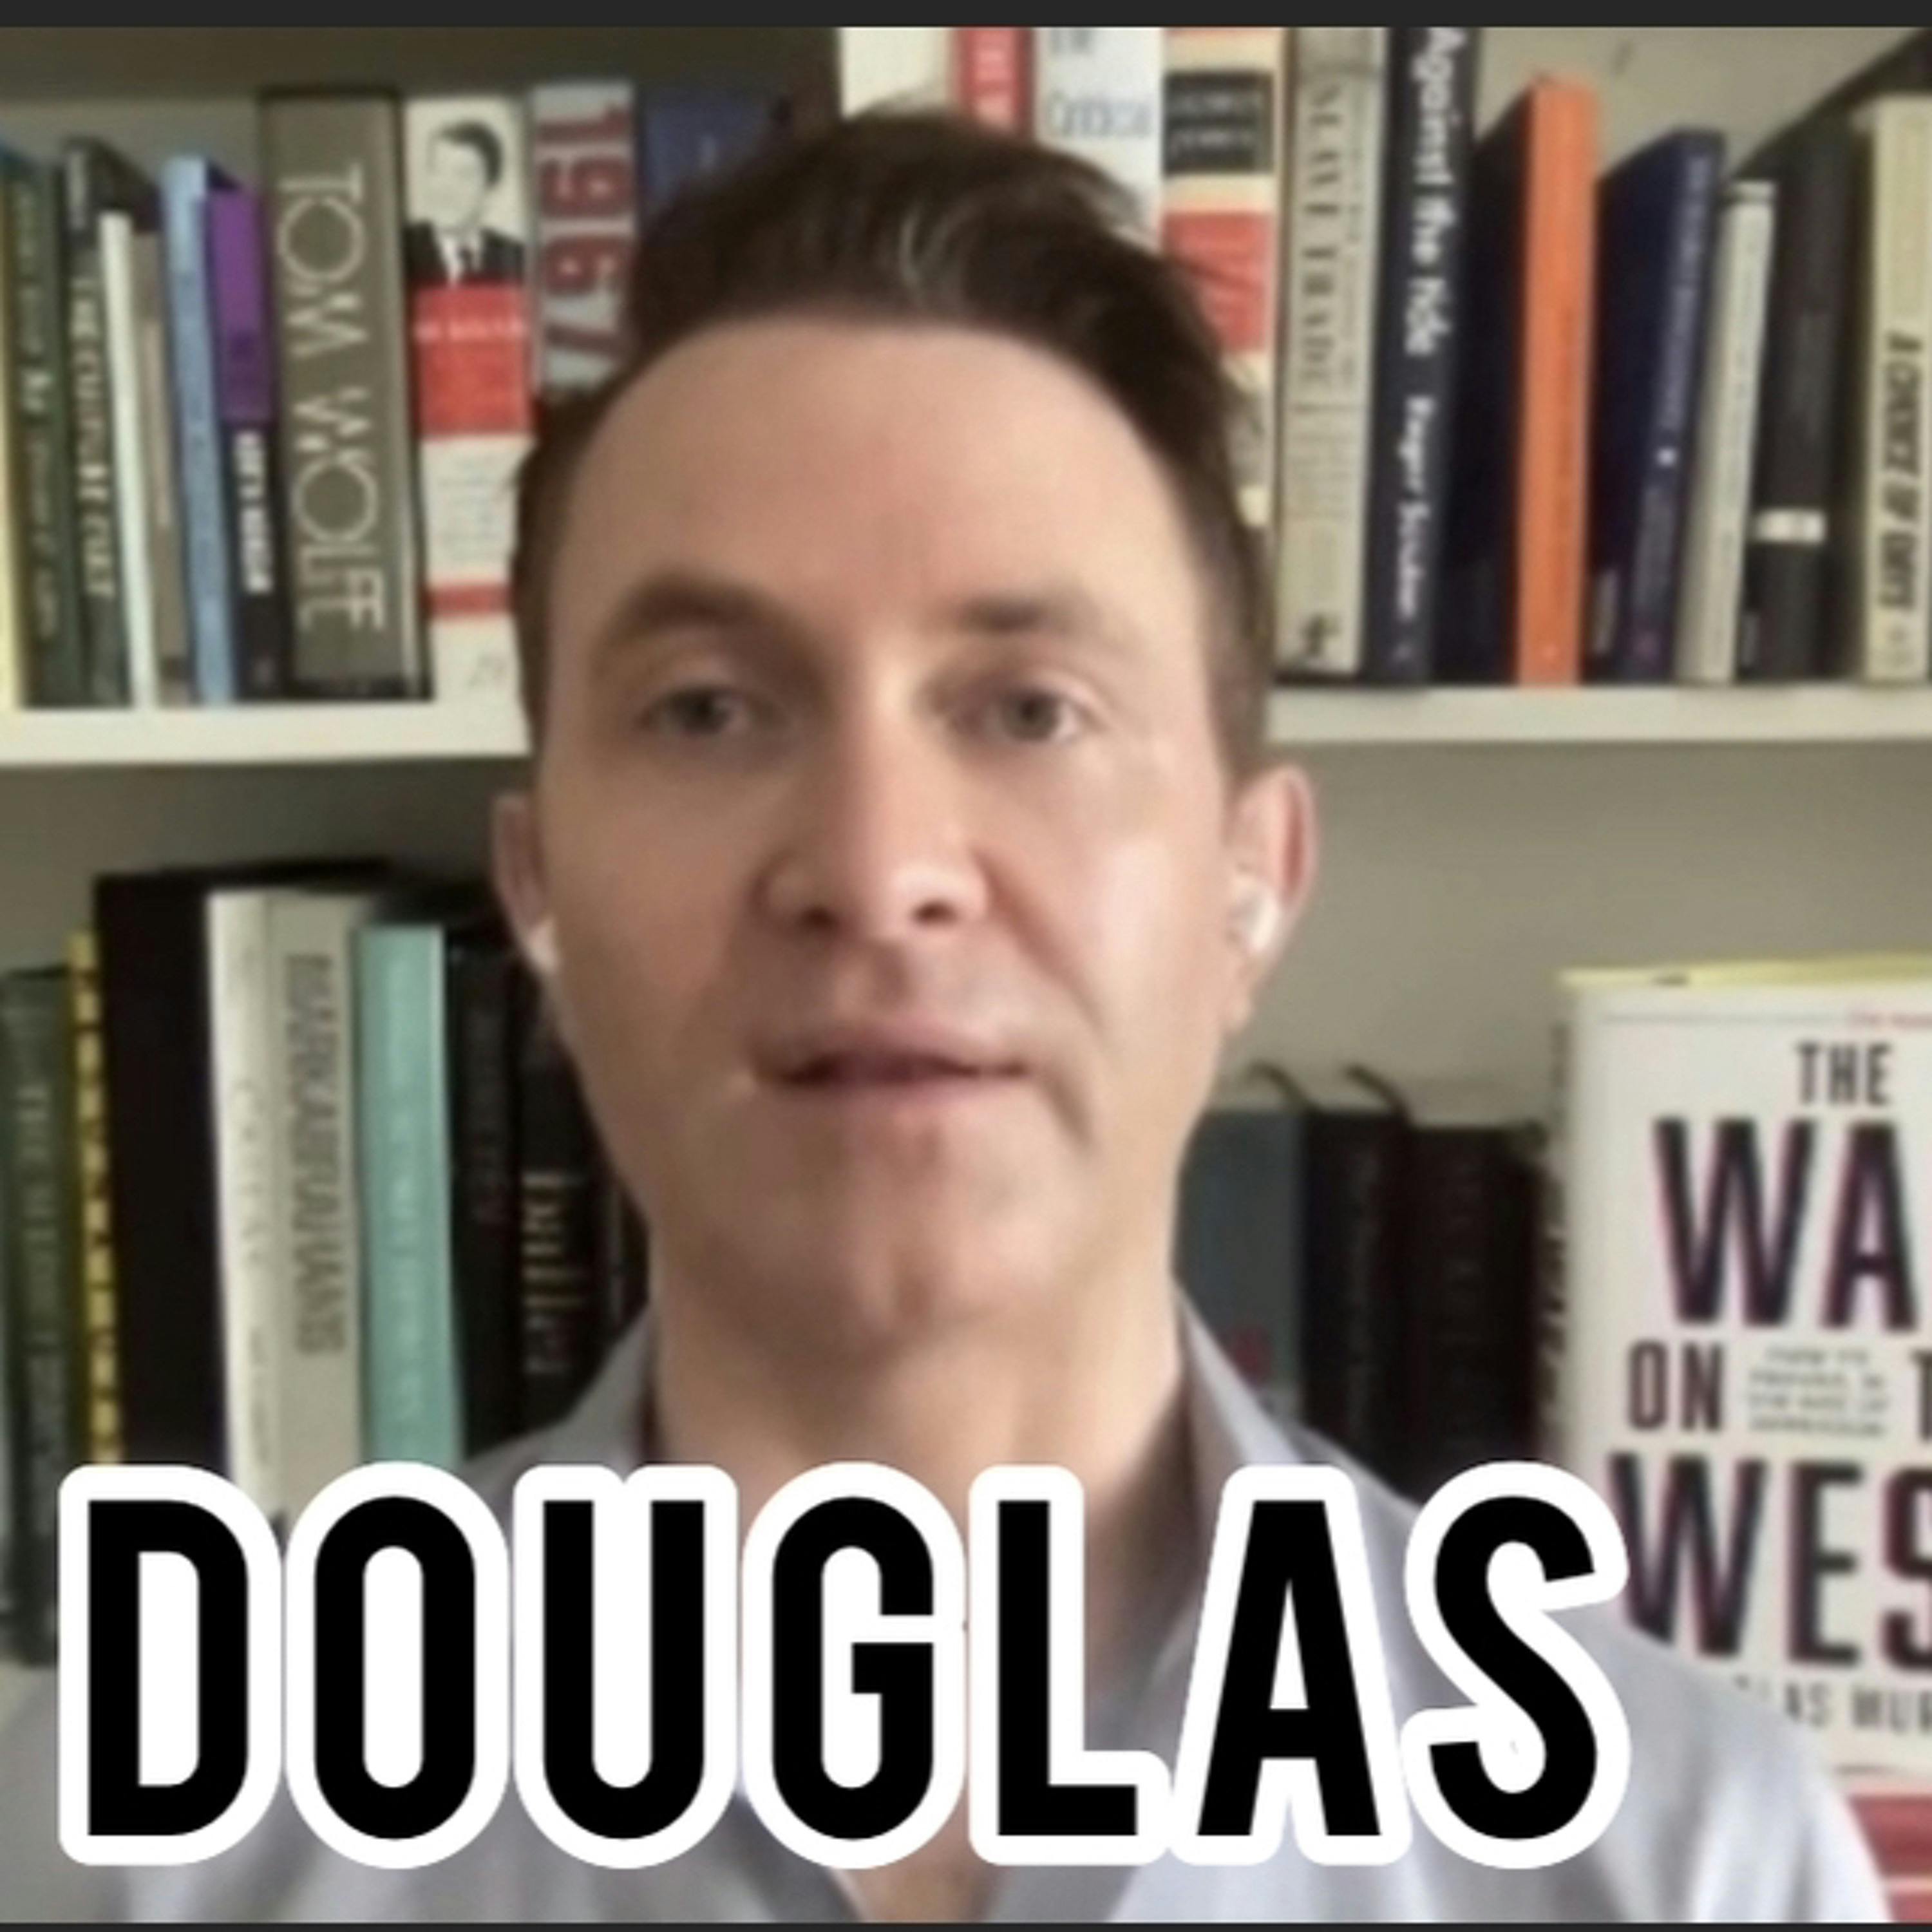 86: Douglas Murray: The War On The West: how to prevail in the age of unreason